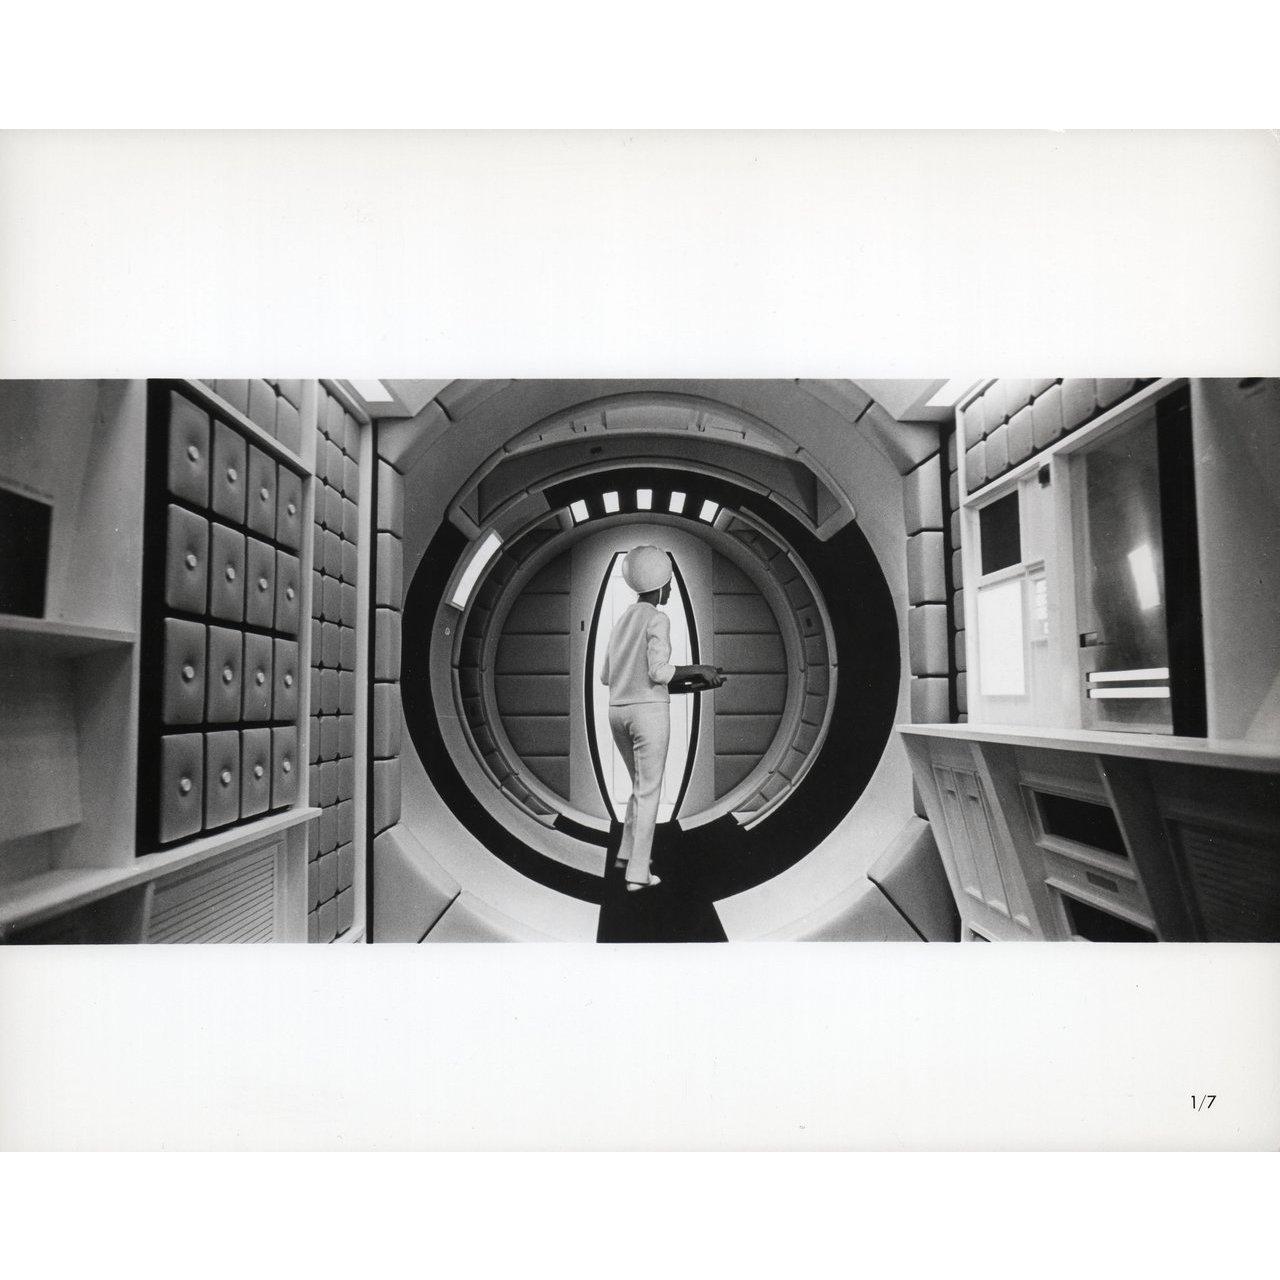 Original 1968 U.S. silver gelatin single-weight photo for the film 2001: A Space Odyssey directed by Stanley Kubrick with Keir Dullea / Gary Lockwood / William Sylvester / Daniel Richter. Fine condition. Please note: the size is stated in inches and